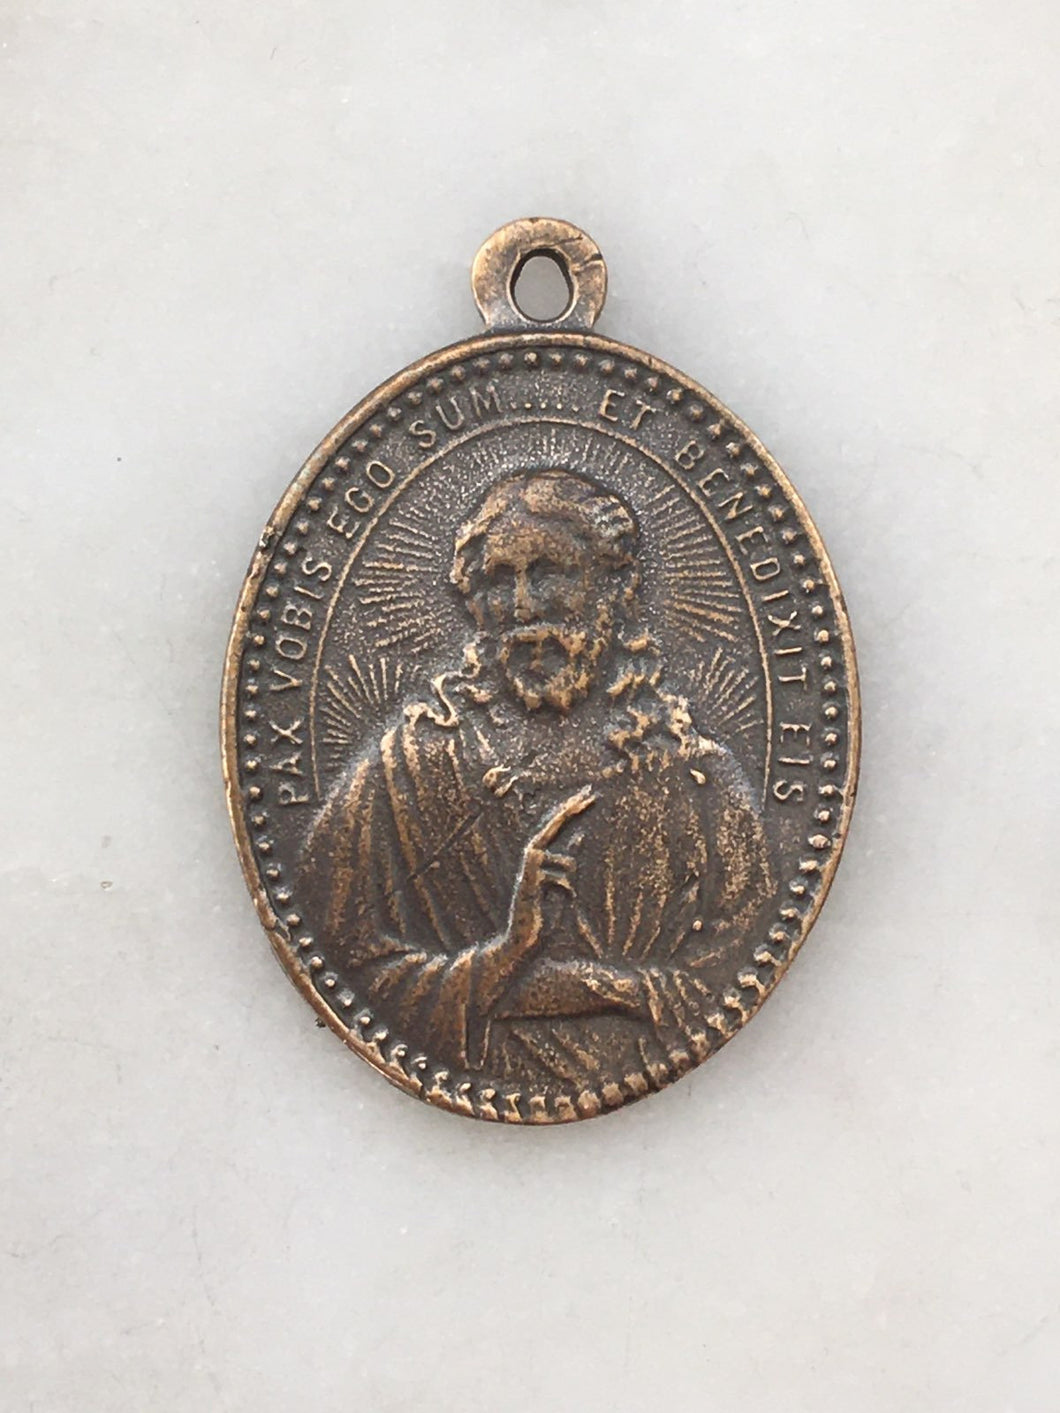 Medal - Jesus, Mary and Joseph - Bronze or Sterling Silver - Antique Reproduction 1565